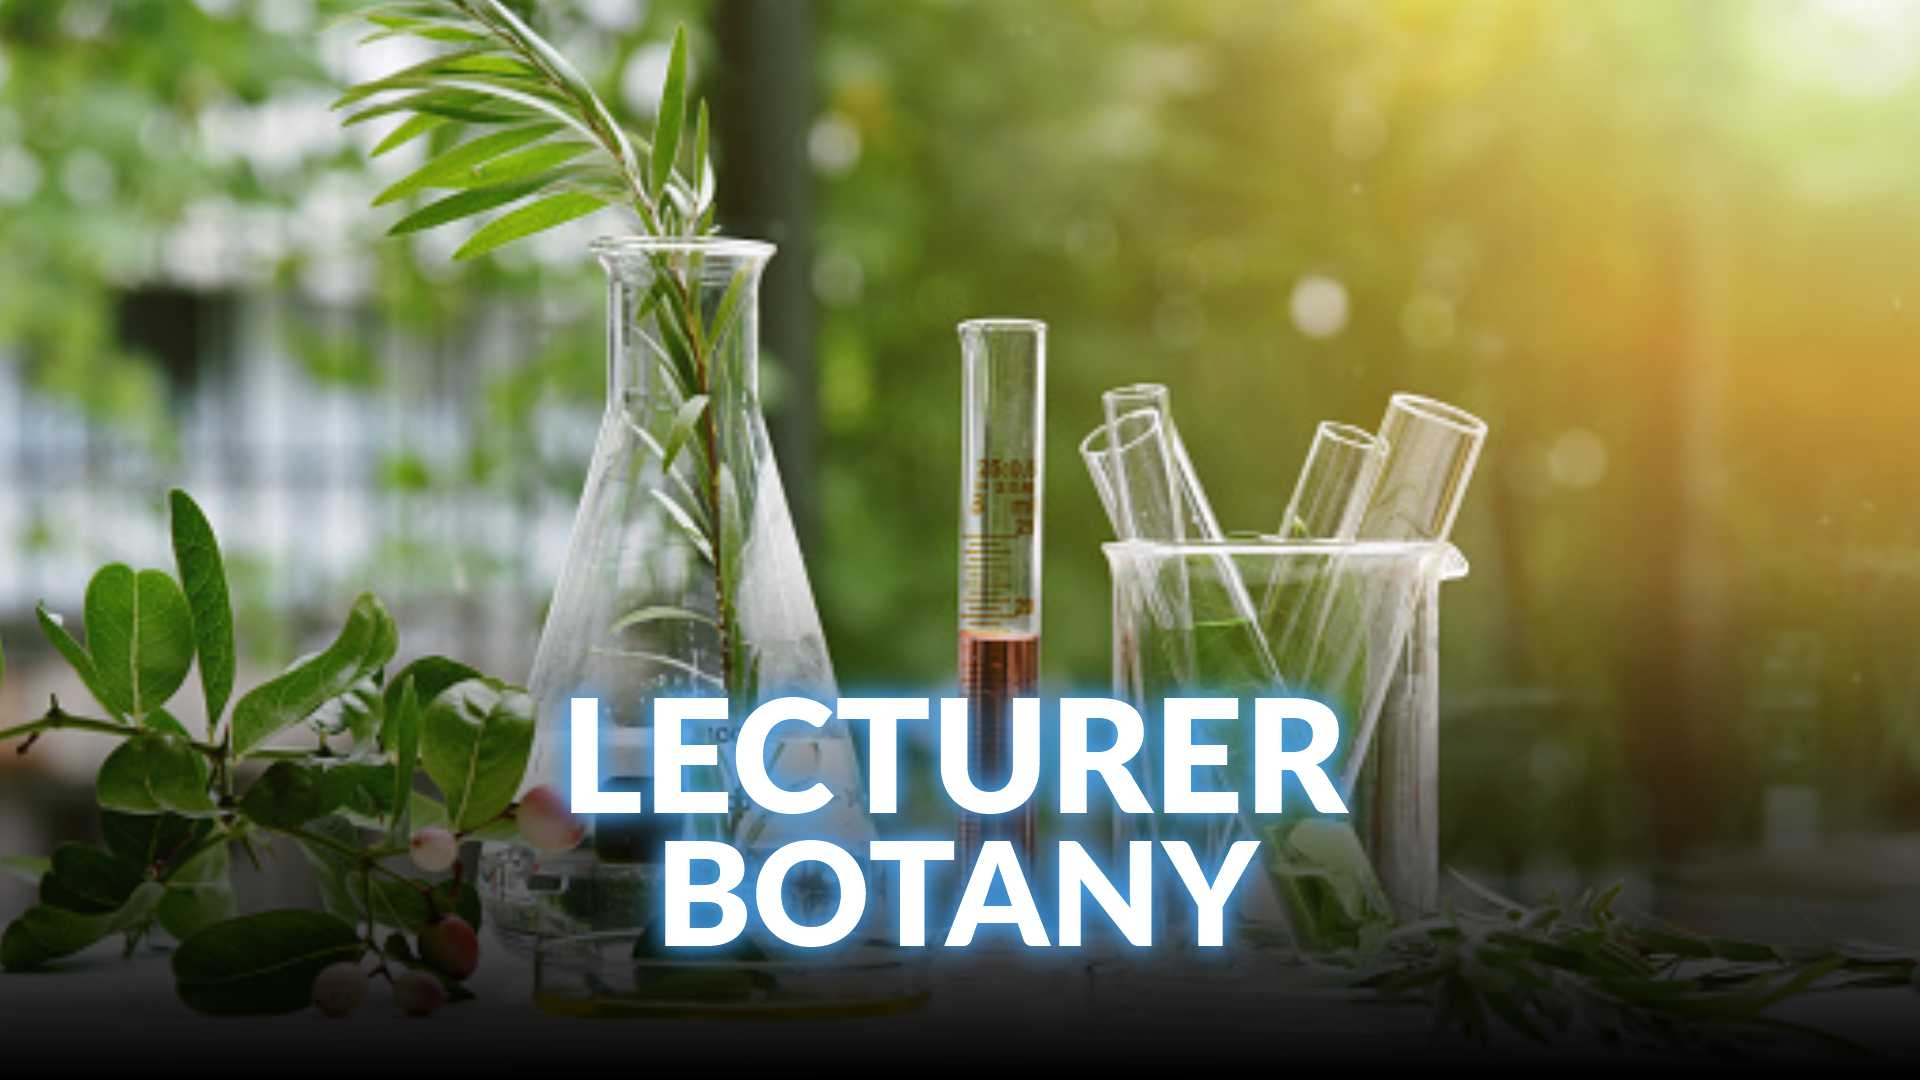 KPPSC Lecturers Botany Preparation Course